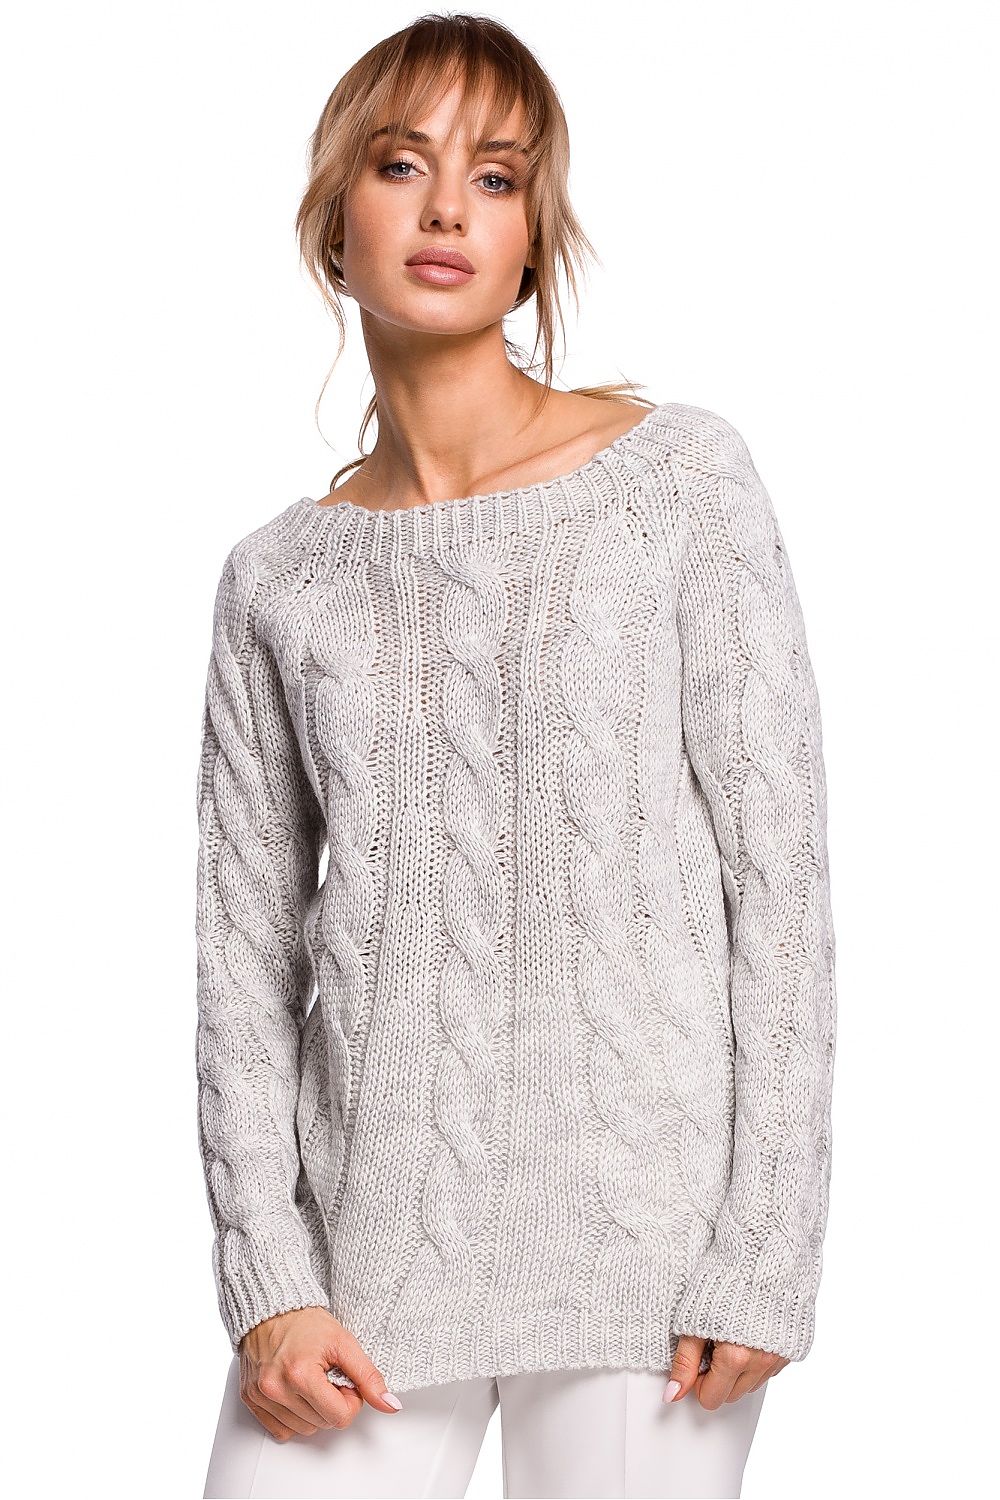 Fitted Jumper with Boat Neckline in Light Grey